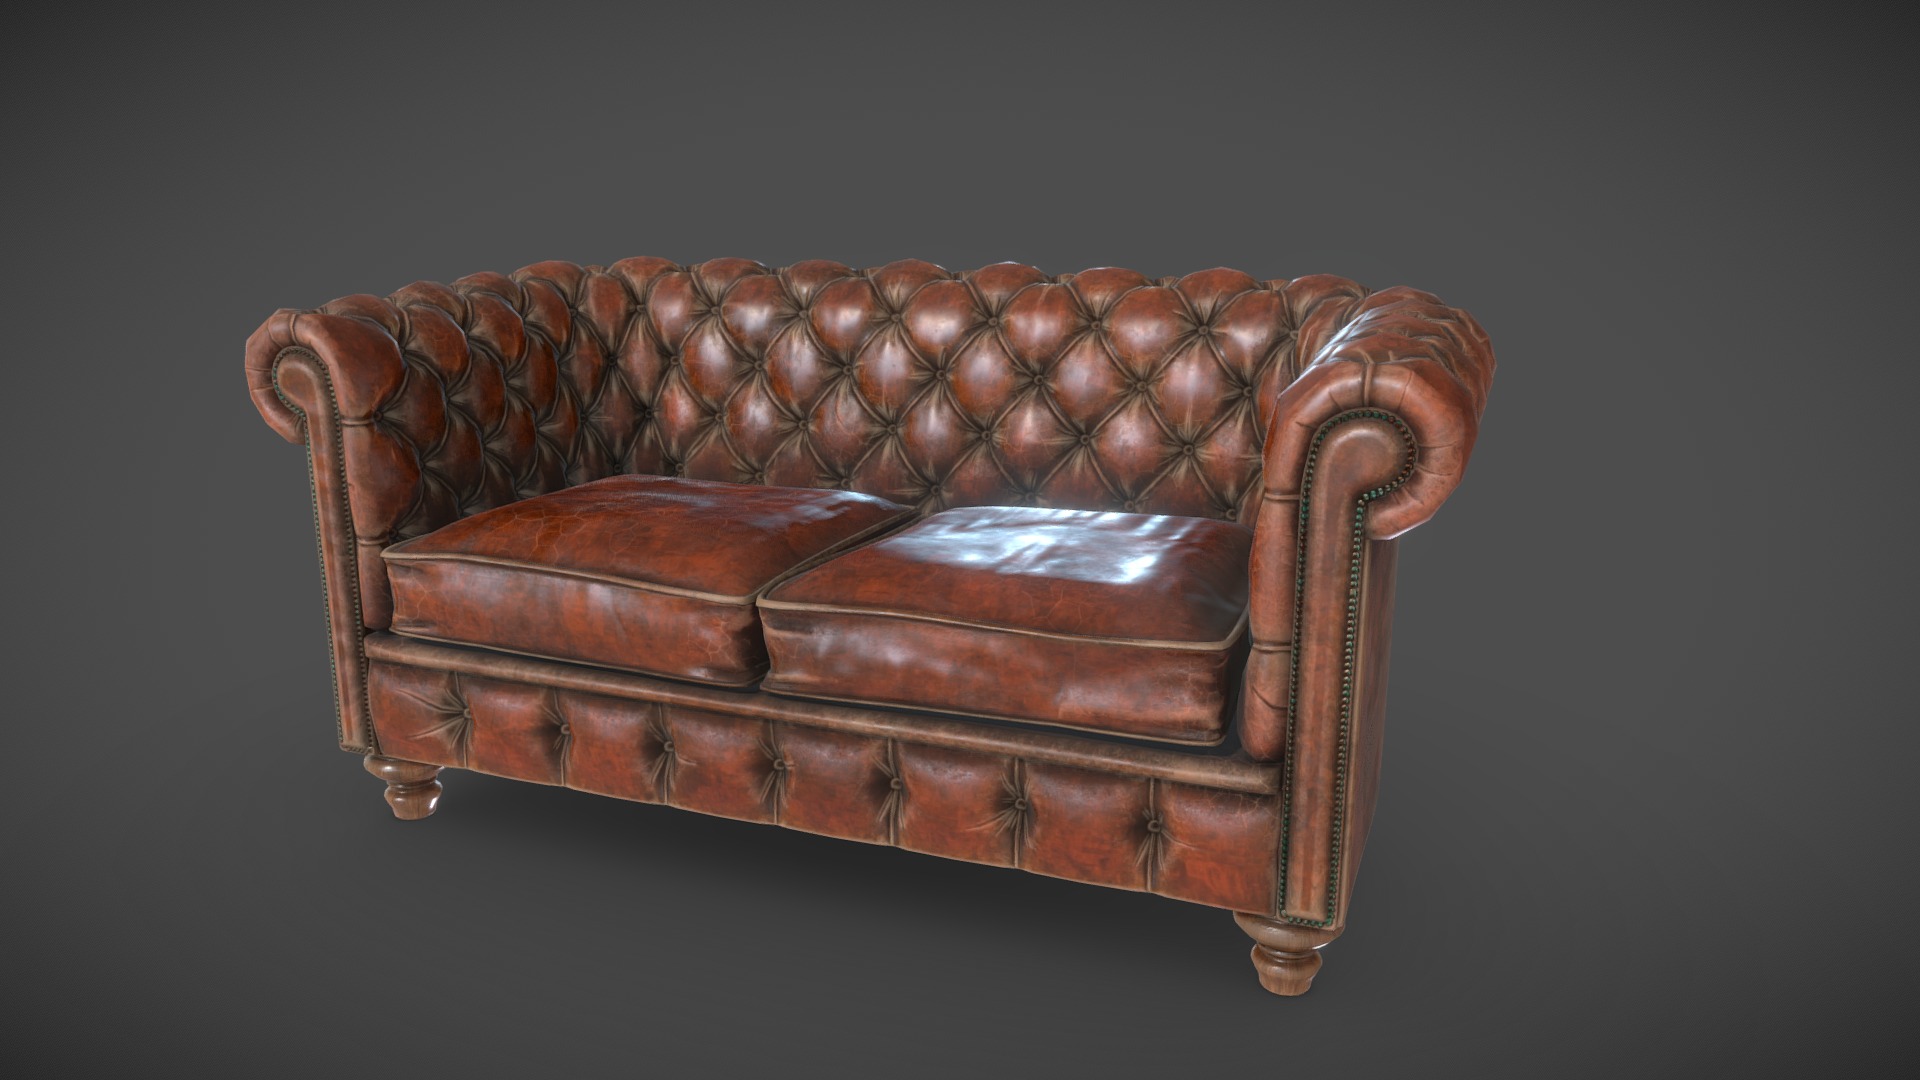 3D model Chesterfield sofa - This is a 3D model of the Chesterfield sofa. The 3D model is about a brown leather couch.